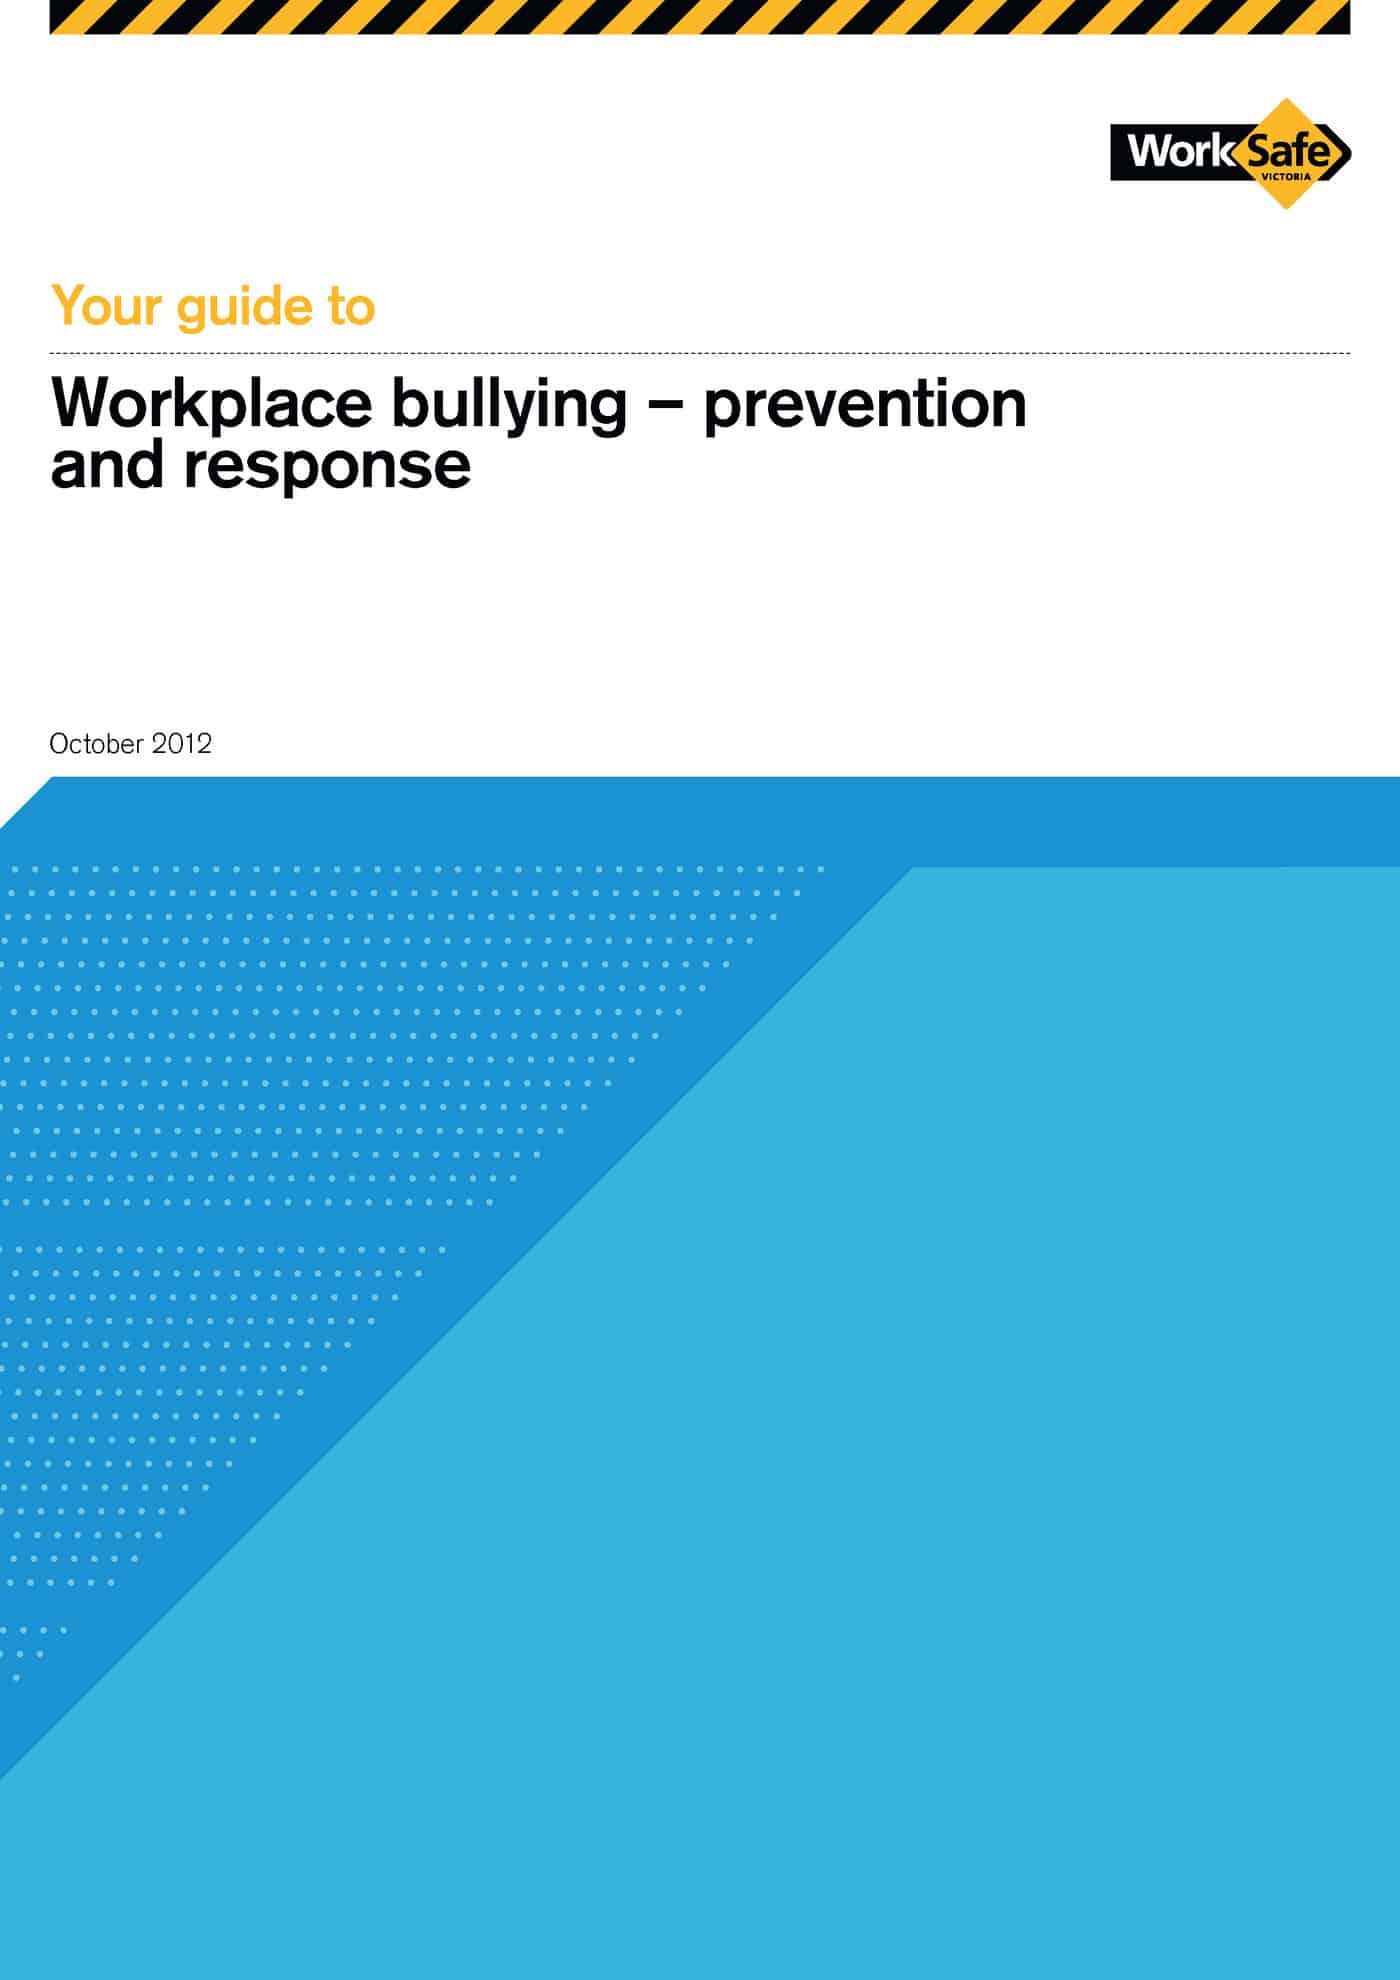 cover of WS_Bullying_Guide_Web2